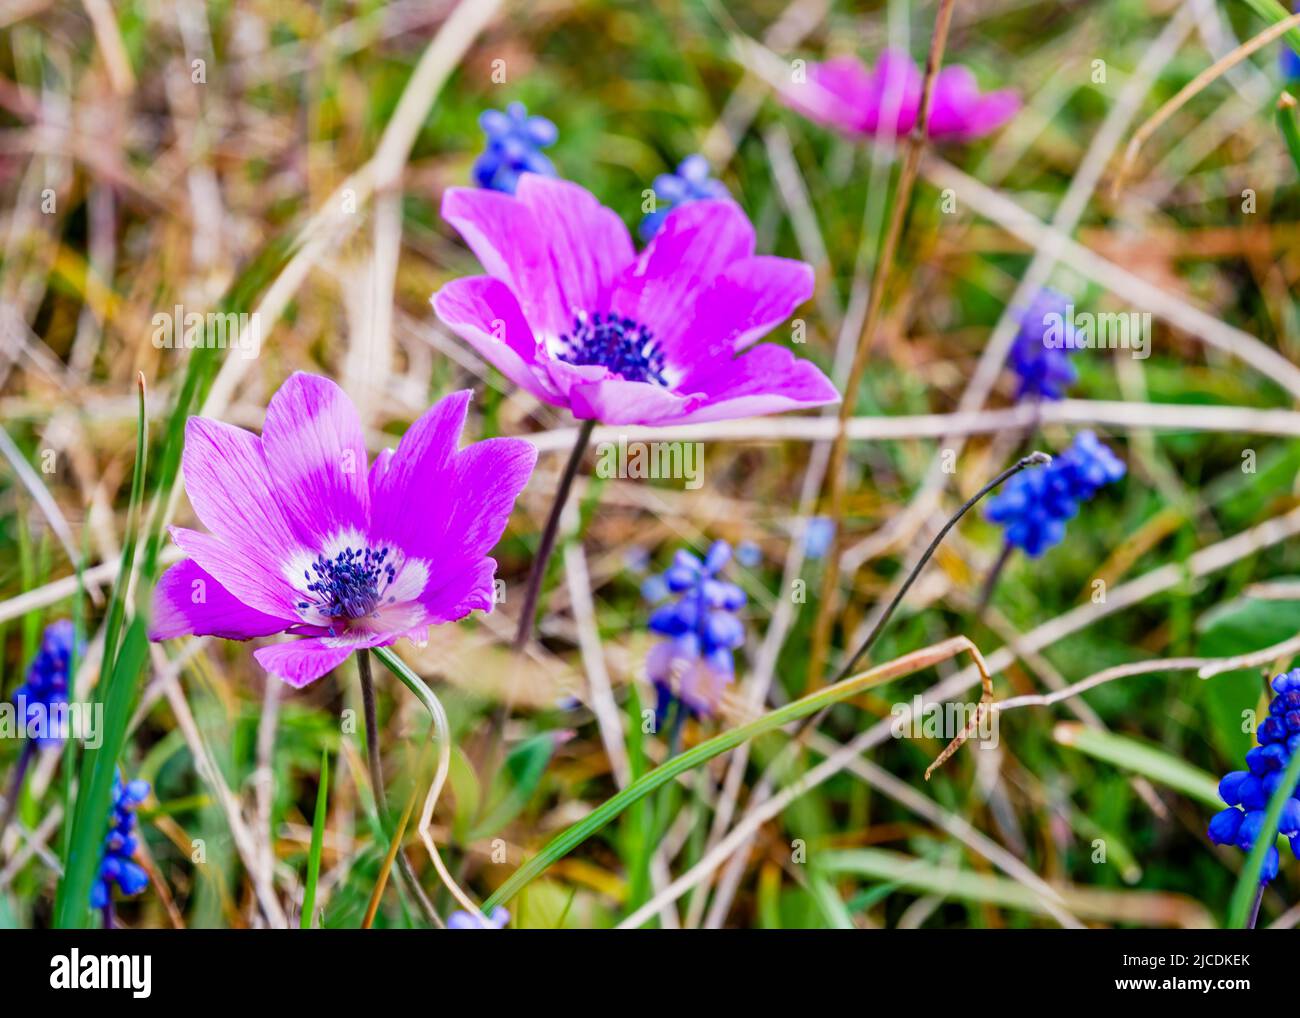 Sring nature background with wild flowers Stock Photo